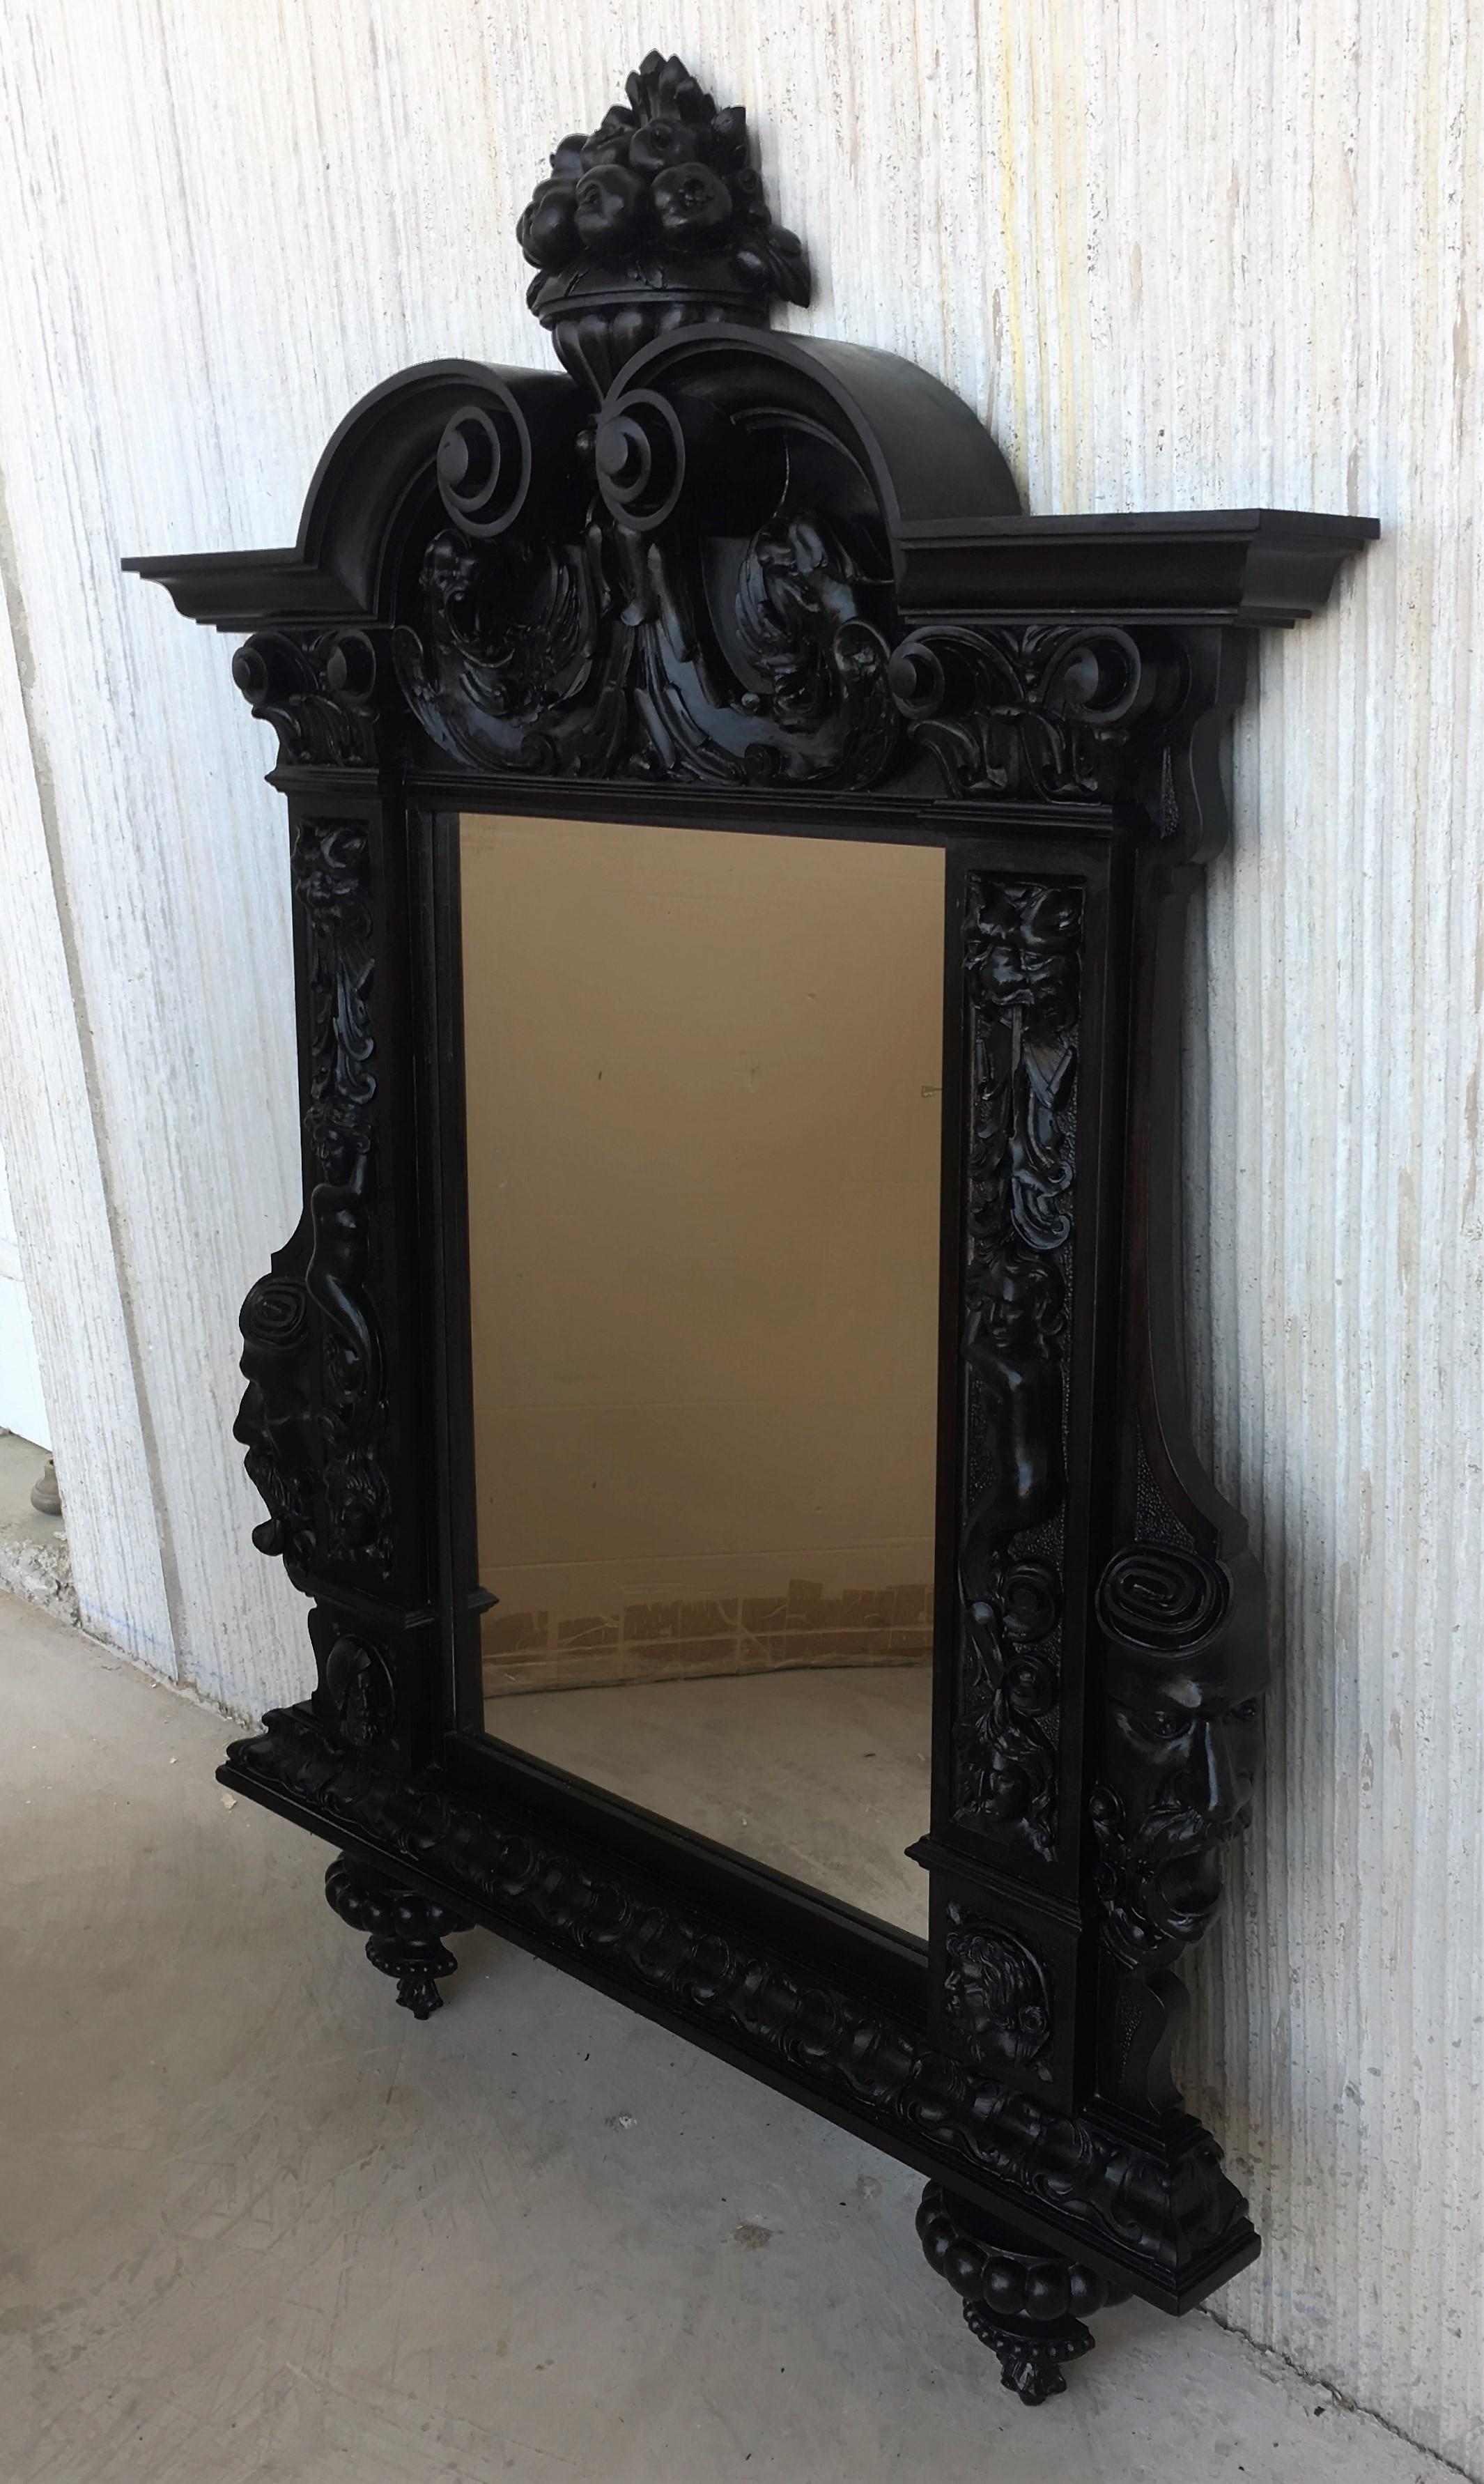 18th century large Flemish baroque walnut ebonized mirror
Very decorative impressively carved mirror in the typical Flemish manner.
 